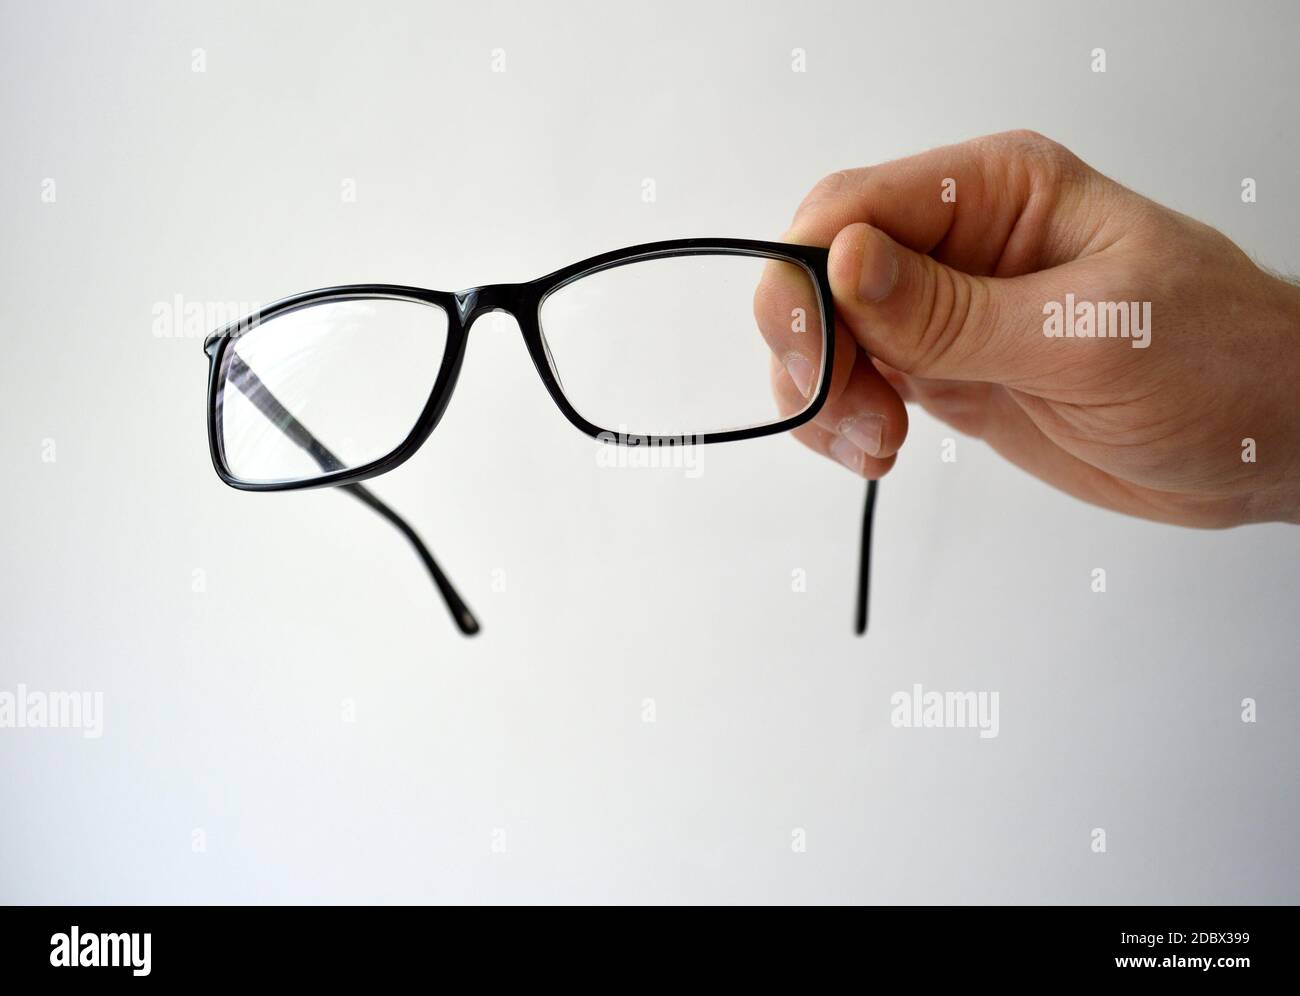 Black glasses in man's hand isolated on white background Stock Photo